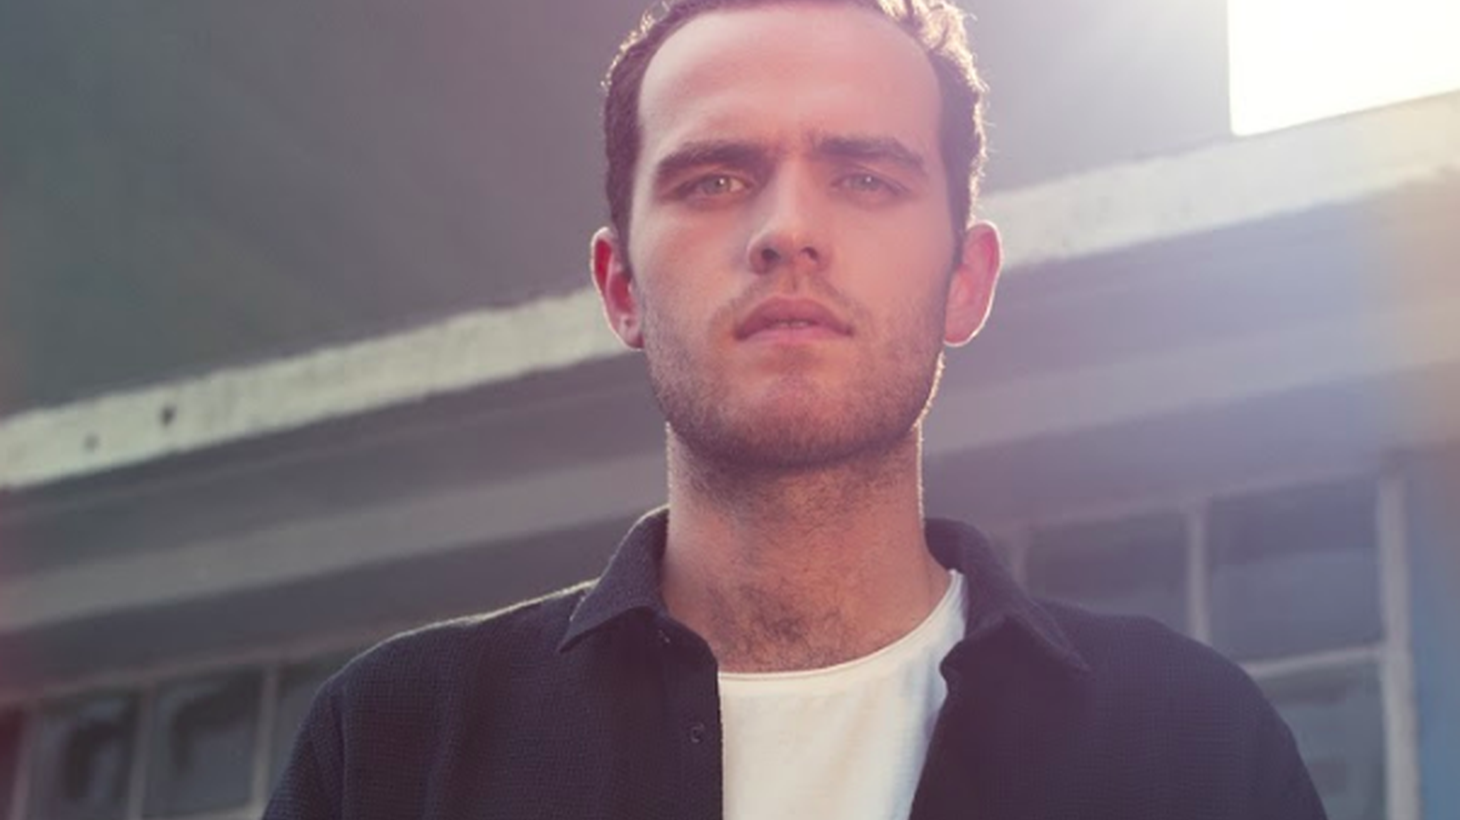 He’s a rare talent emerging from London’s current nexus of jazz, hip-hop, and electronic musicians. We expect you’ll be hearing the name Jordan Rakei for many years to come.